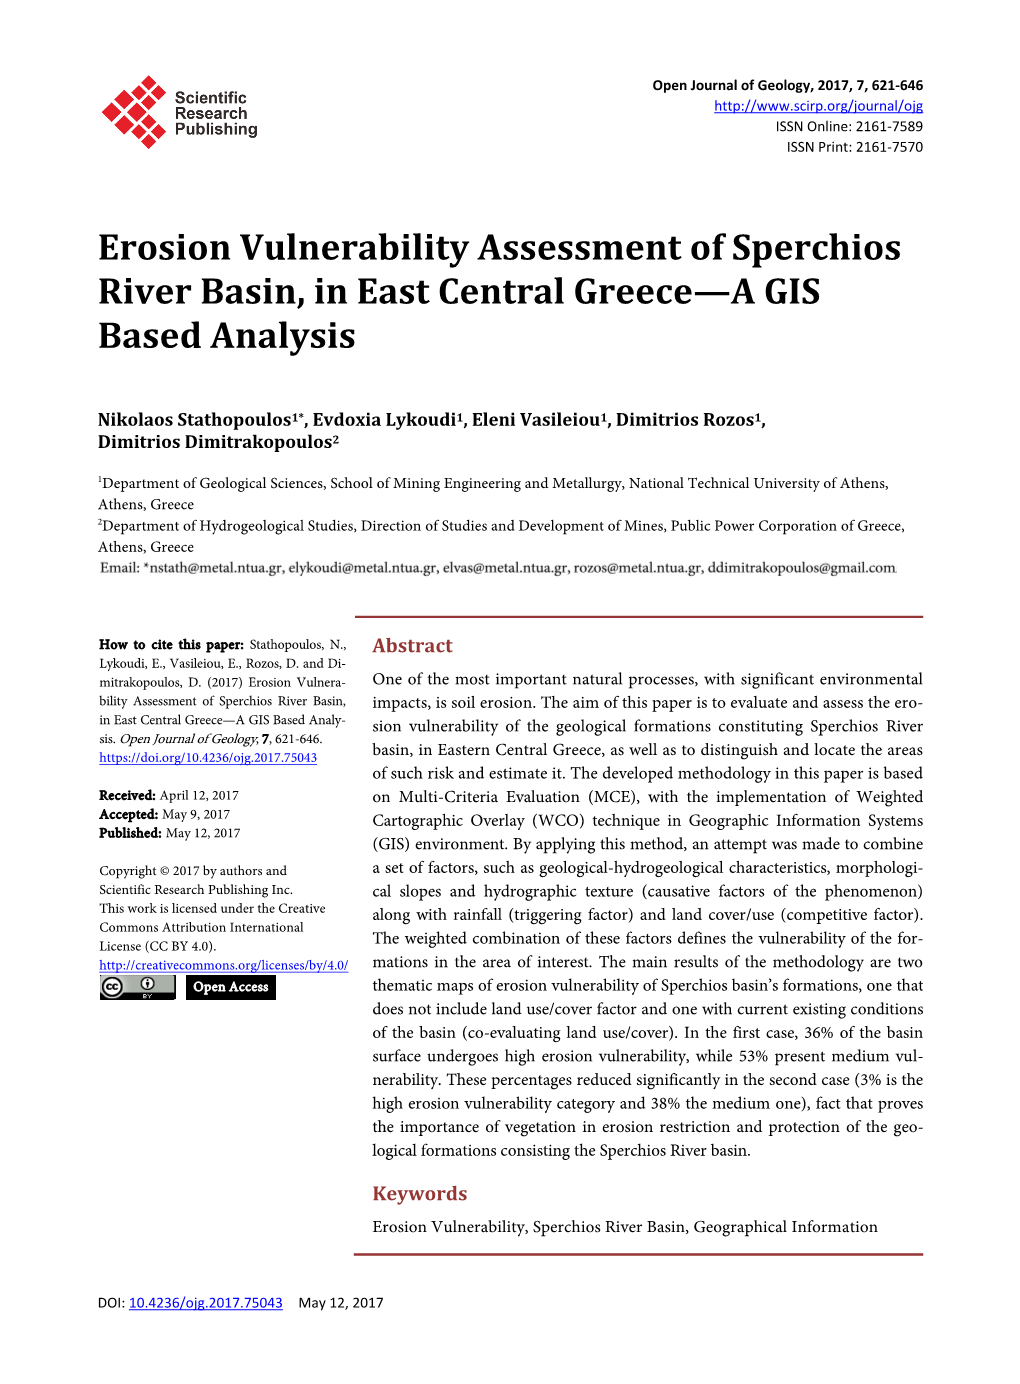 Erosion Vulnerability Assessment of Sperchios River Basin, in East Central Greece—A GIS Based Analysis